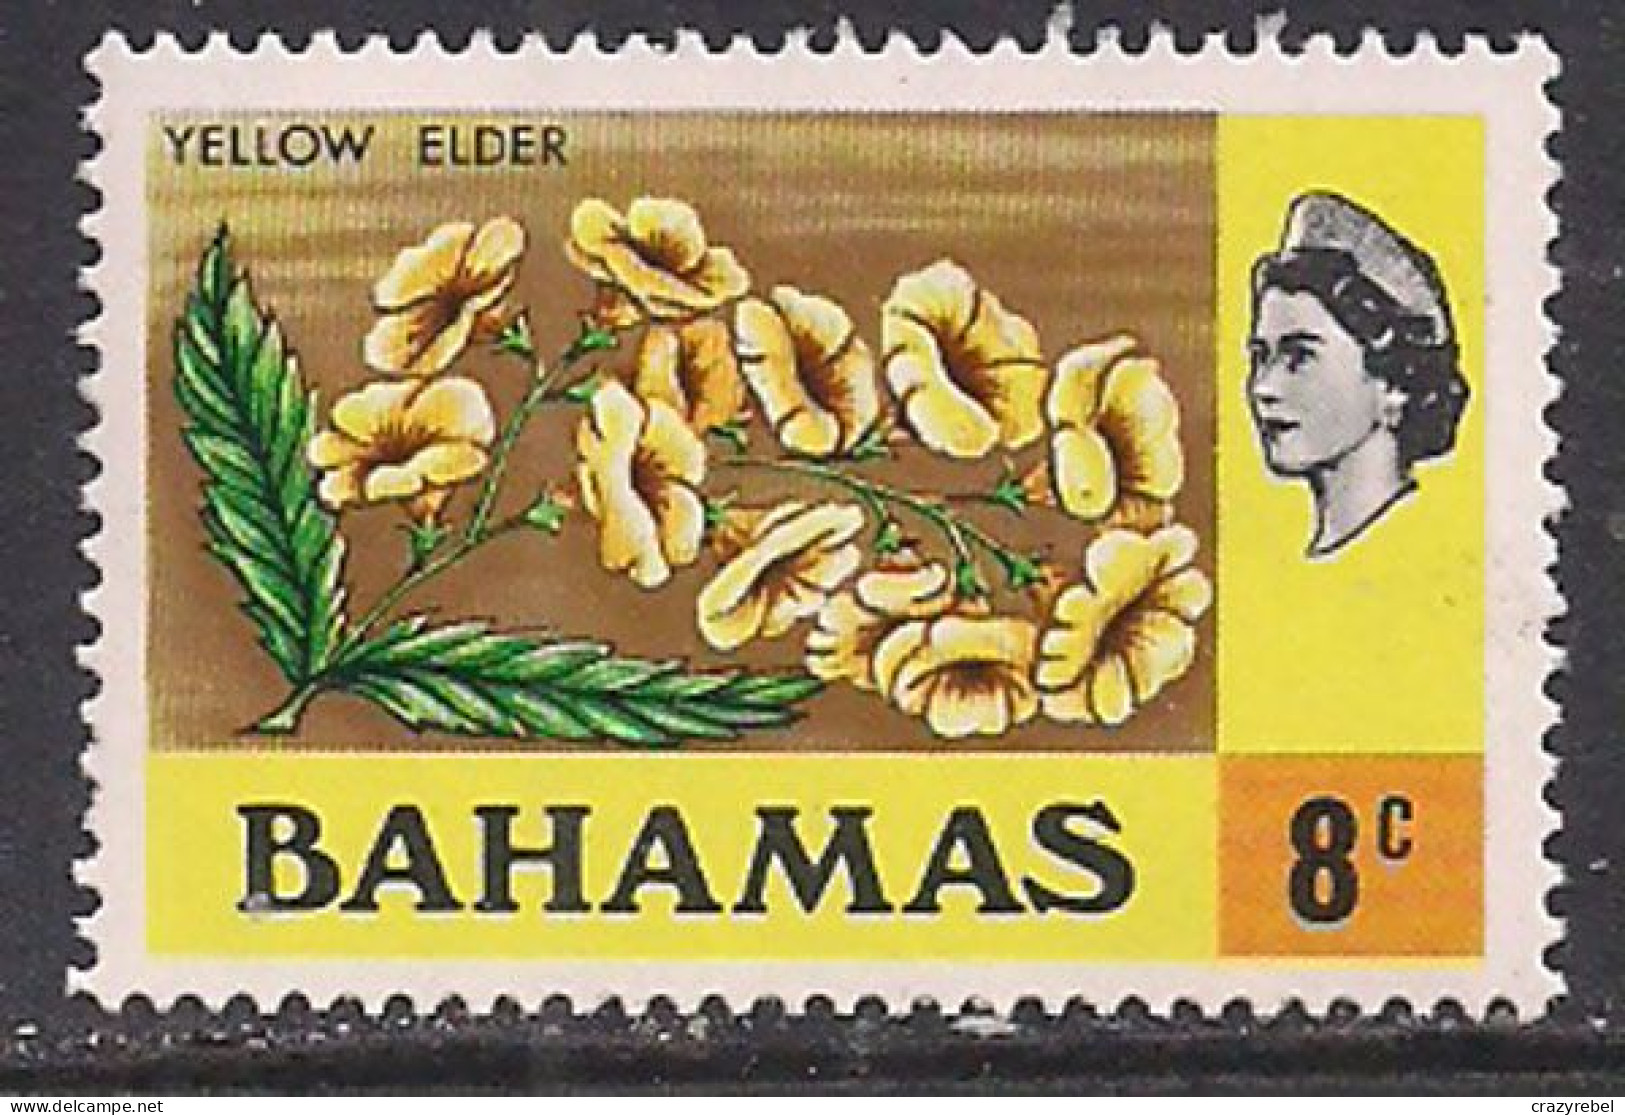 Bahamas 1971 QE2 8c  Flowers SG 366 MNH ( J1040 ) - 1963-1973 Ministerial Government